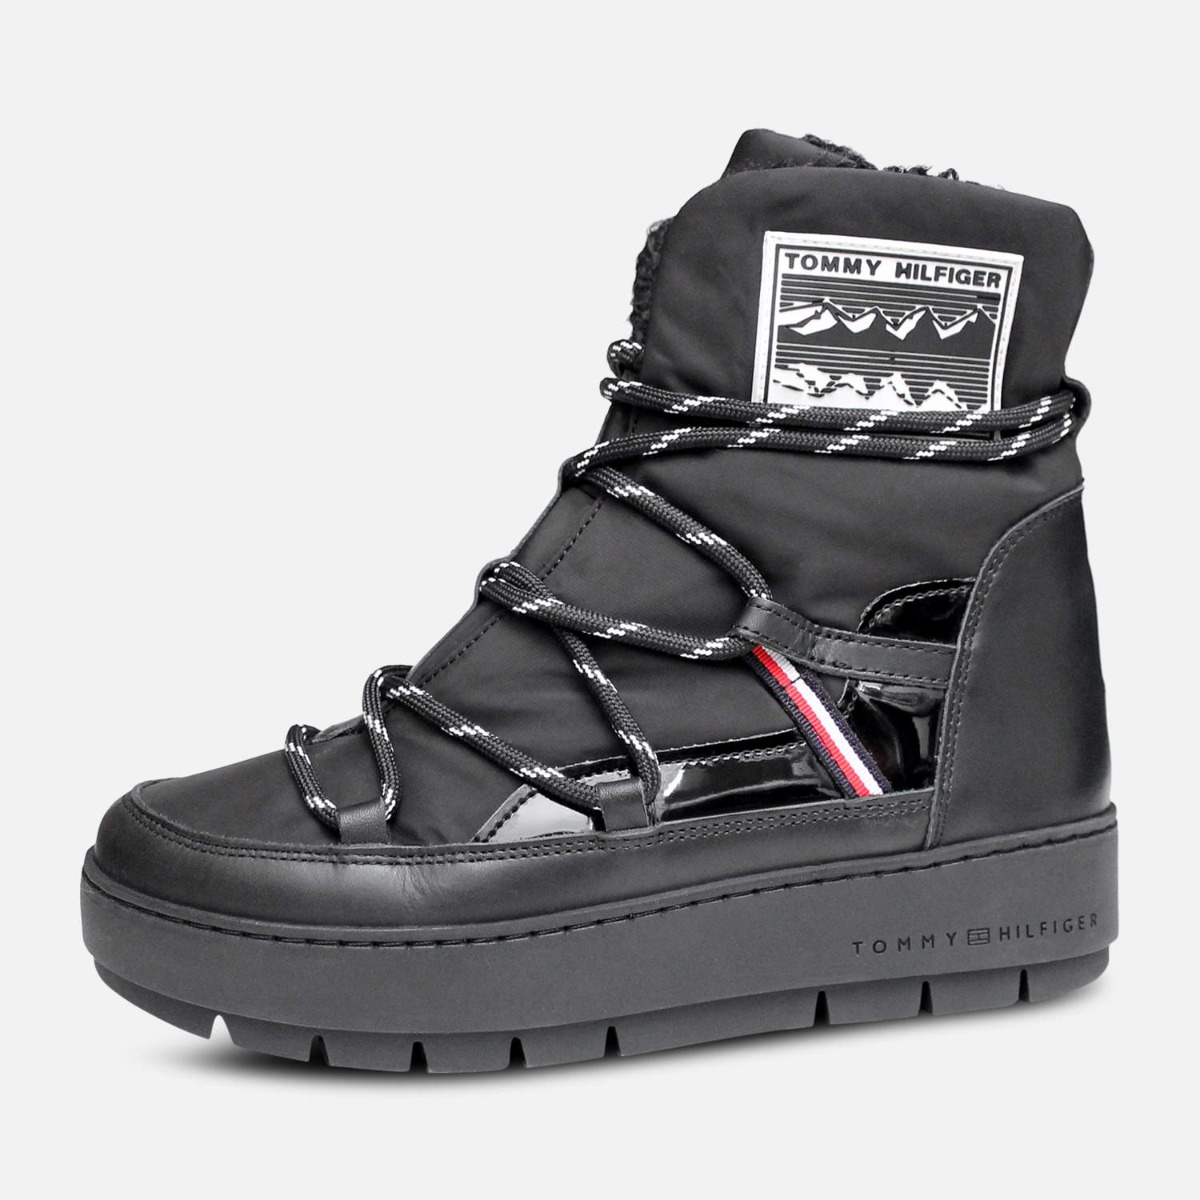 Buy > tommy hilfiger snow boot > in stock